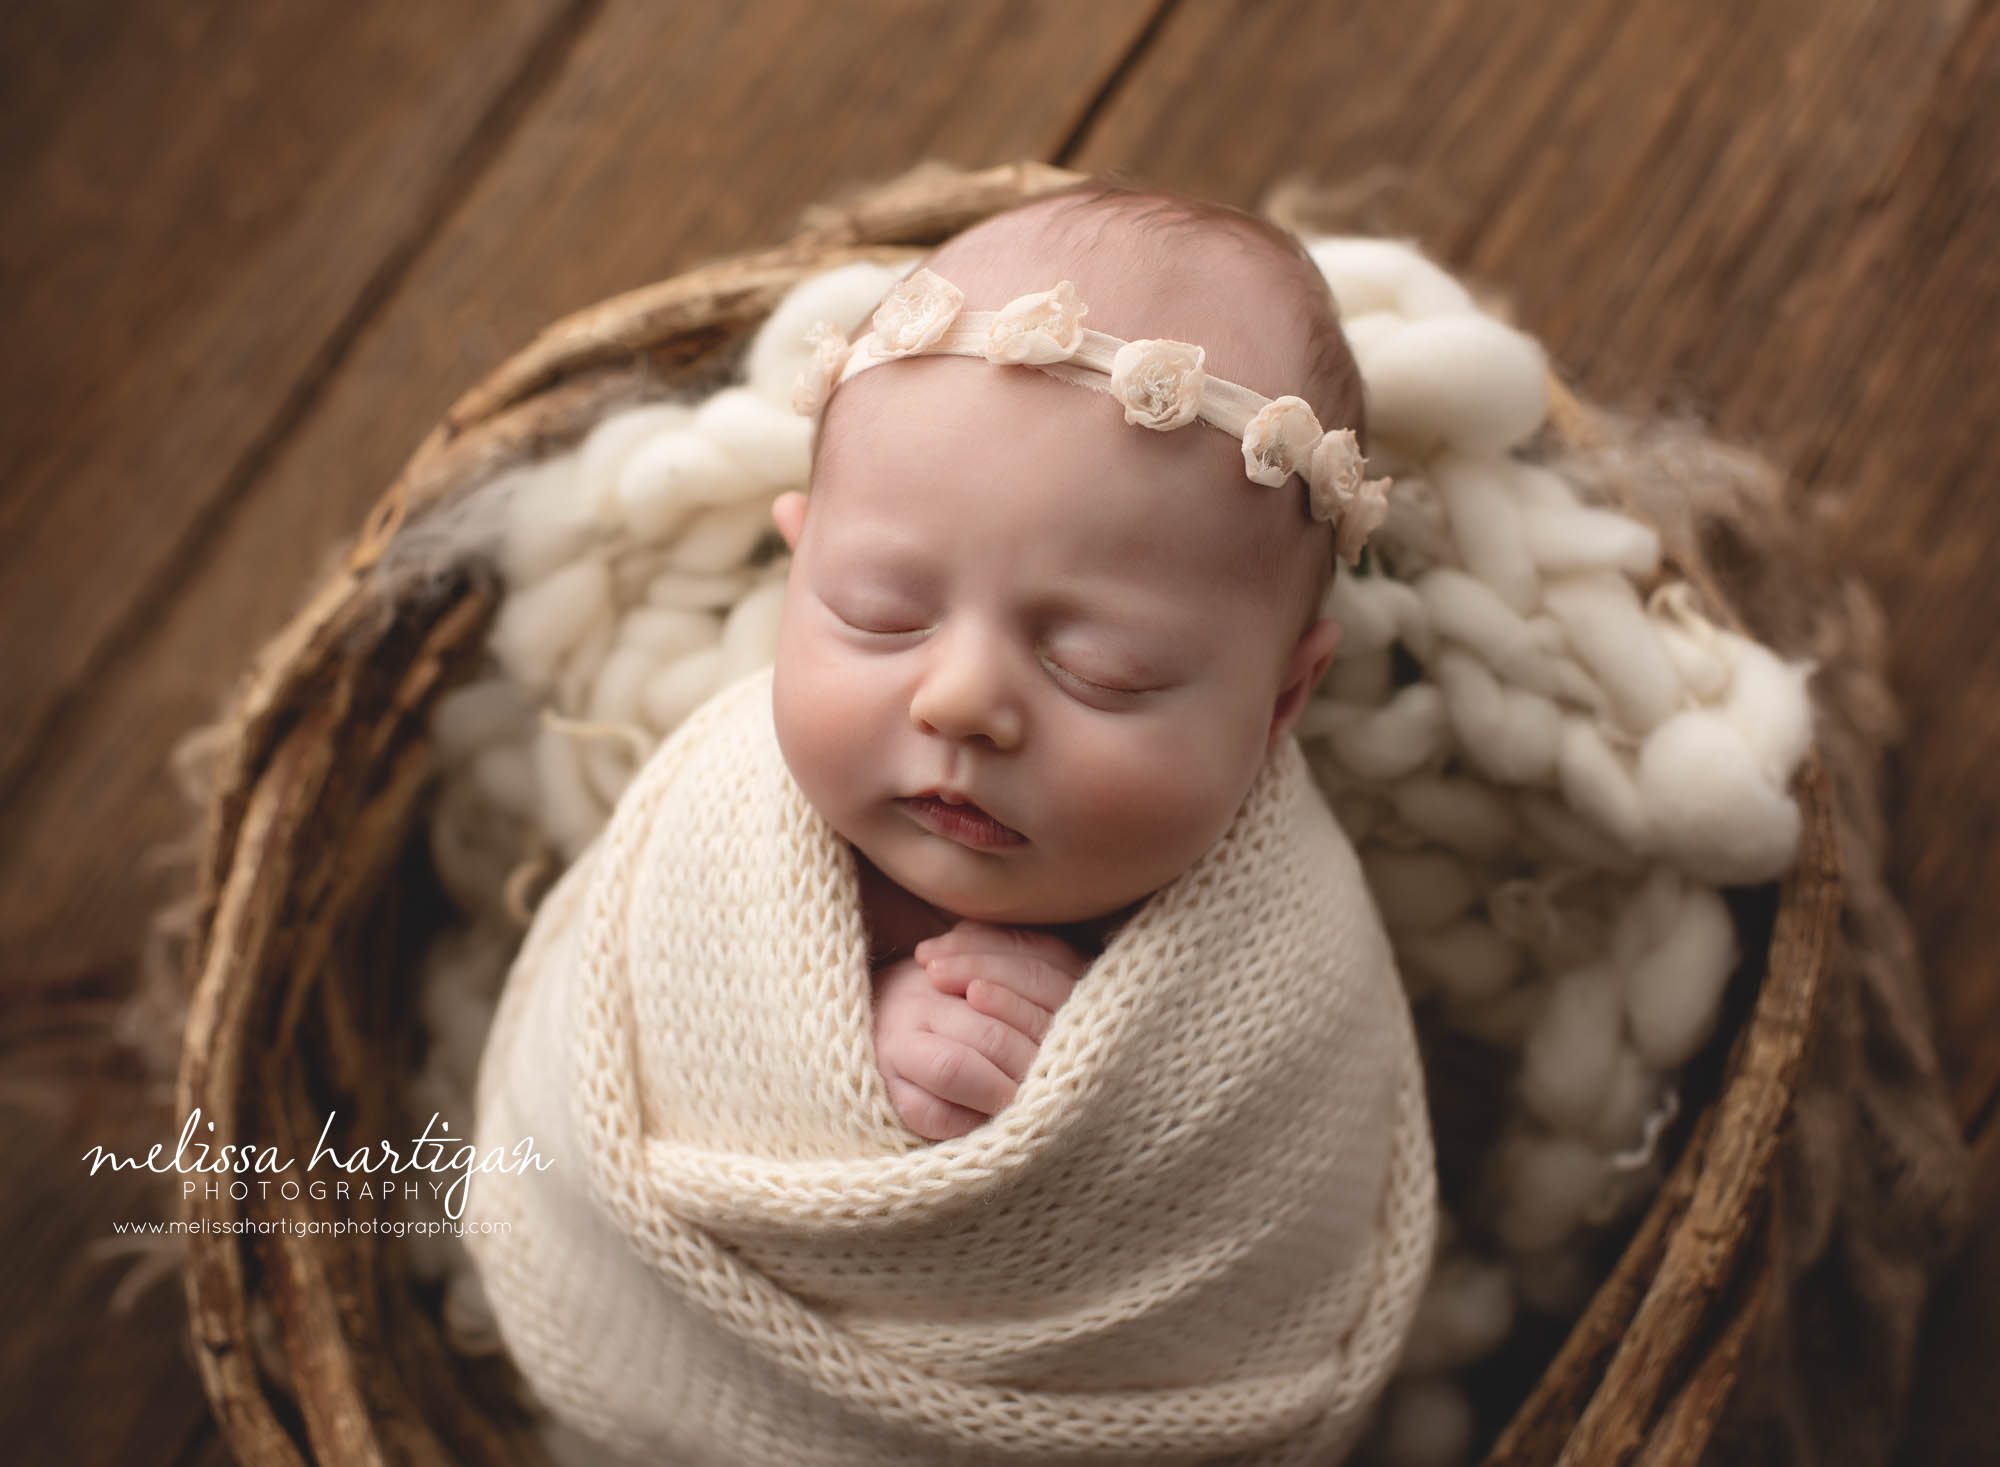 baby girl wrapped in knitted cream wrap with floral cream colored headband Ct newborn photographer